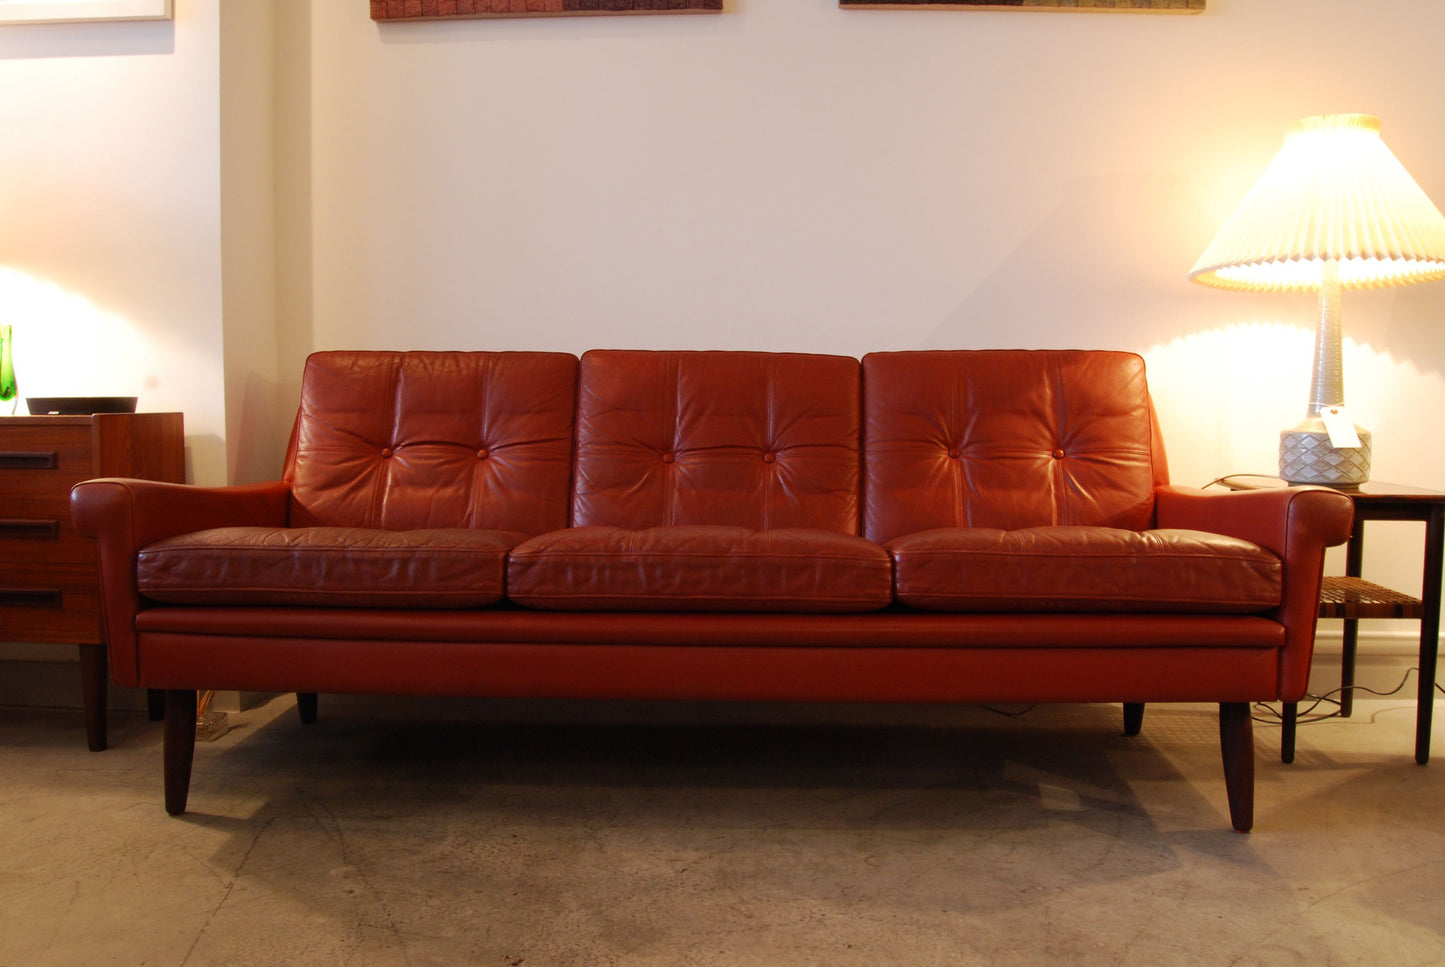 Three seat sofa in red leather